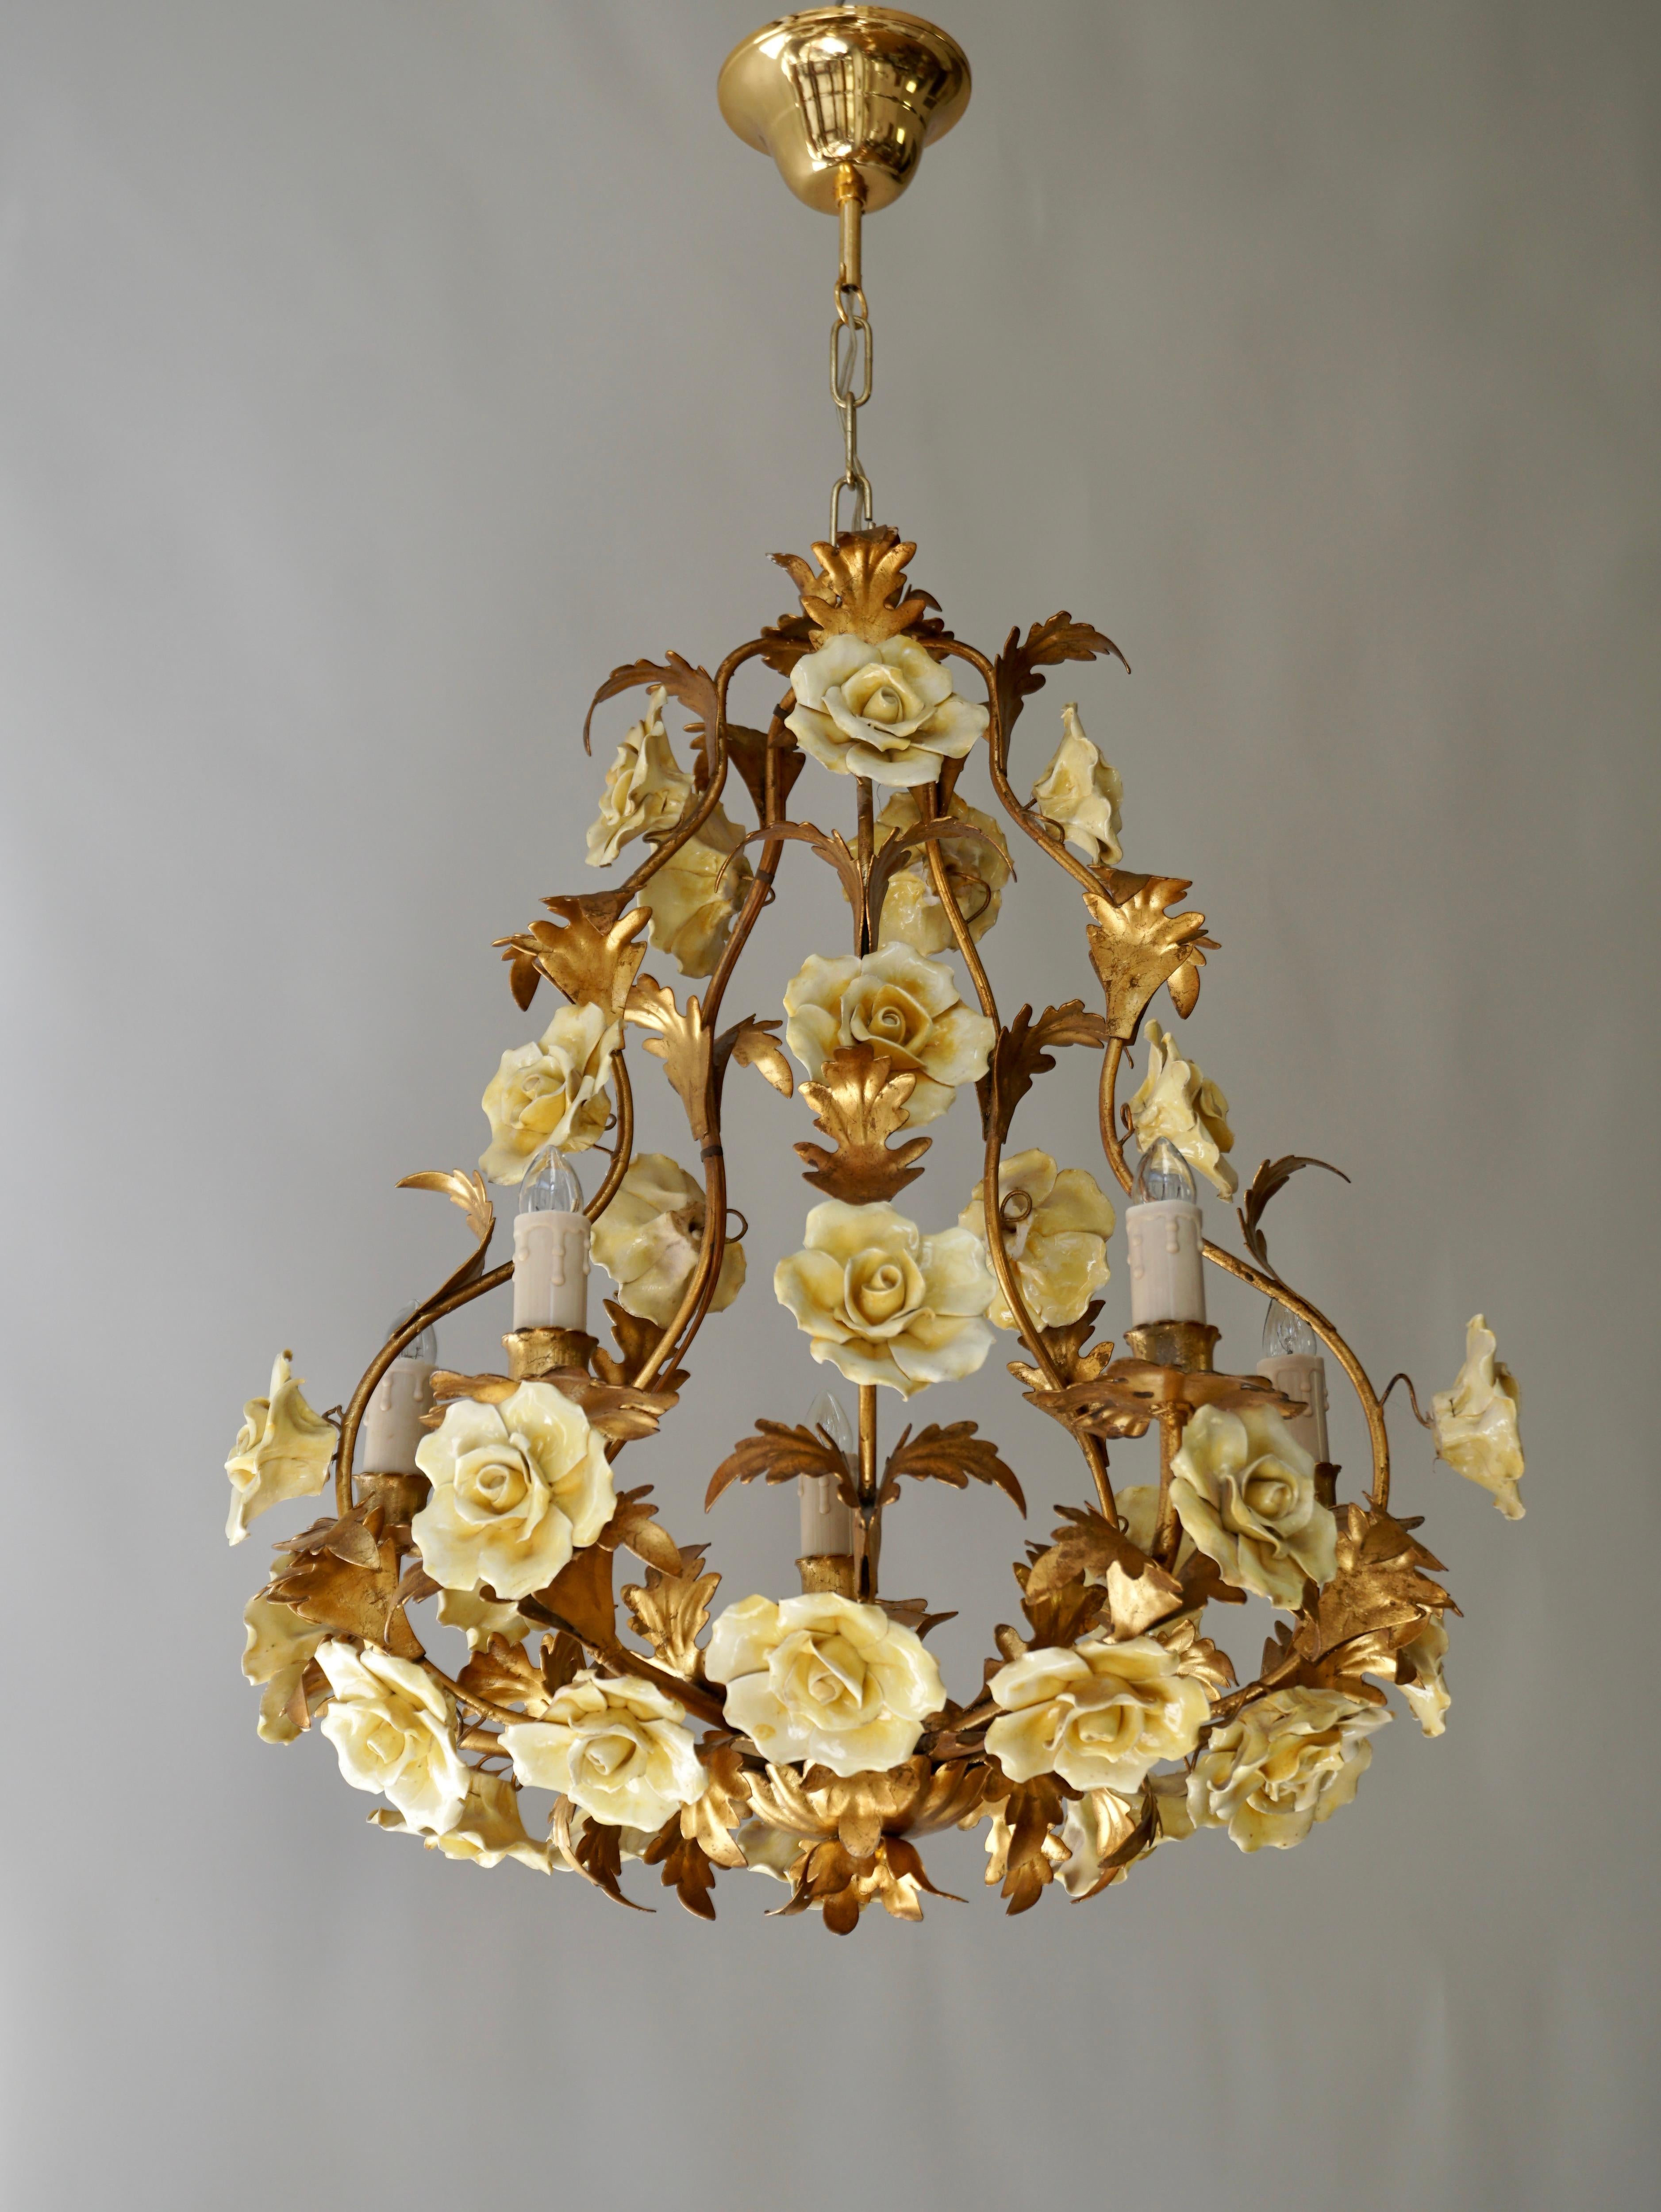 Italian Hollywood Regency six light chandelier in brass with yellow porcelain flowers. 

Diameter 50 cm - 19.7 inch.
Height fixture 55 cm - 21.6 inch.
Total height including the chain 70 cm - 27.5 inch.

We have the same chandelier but with pink